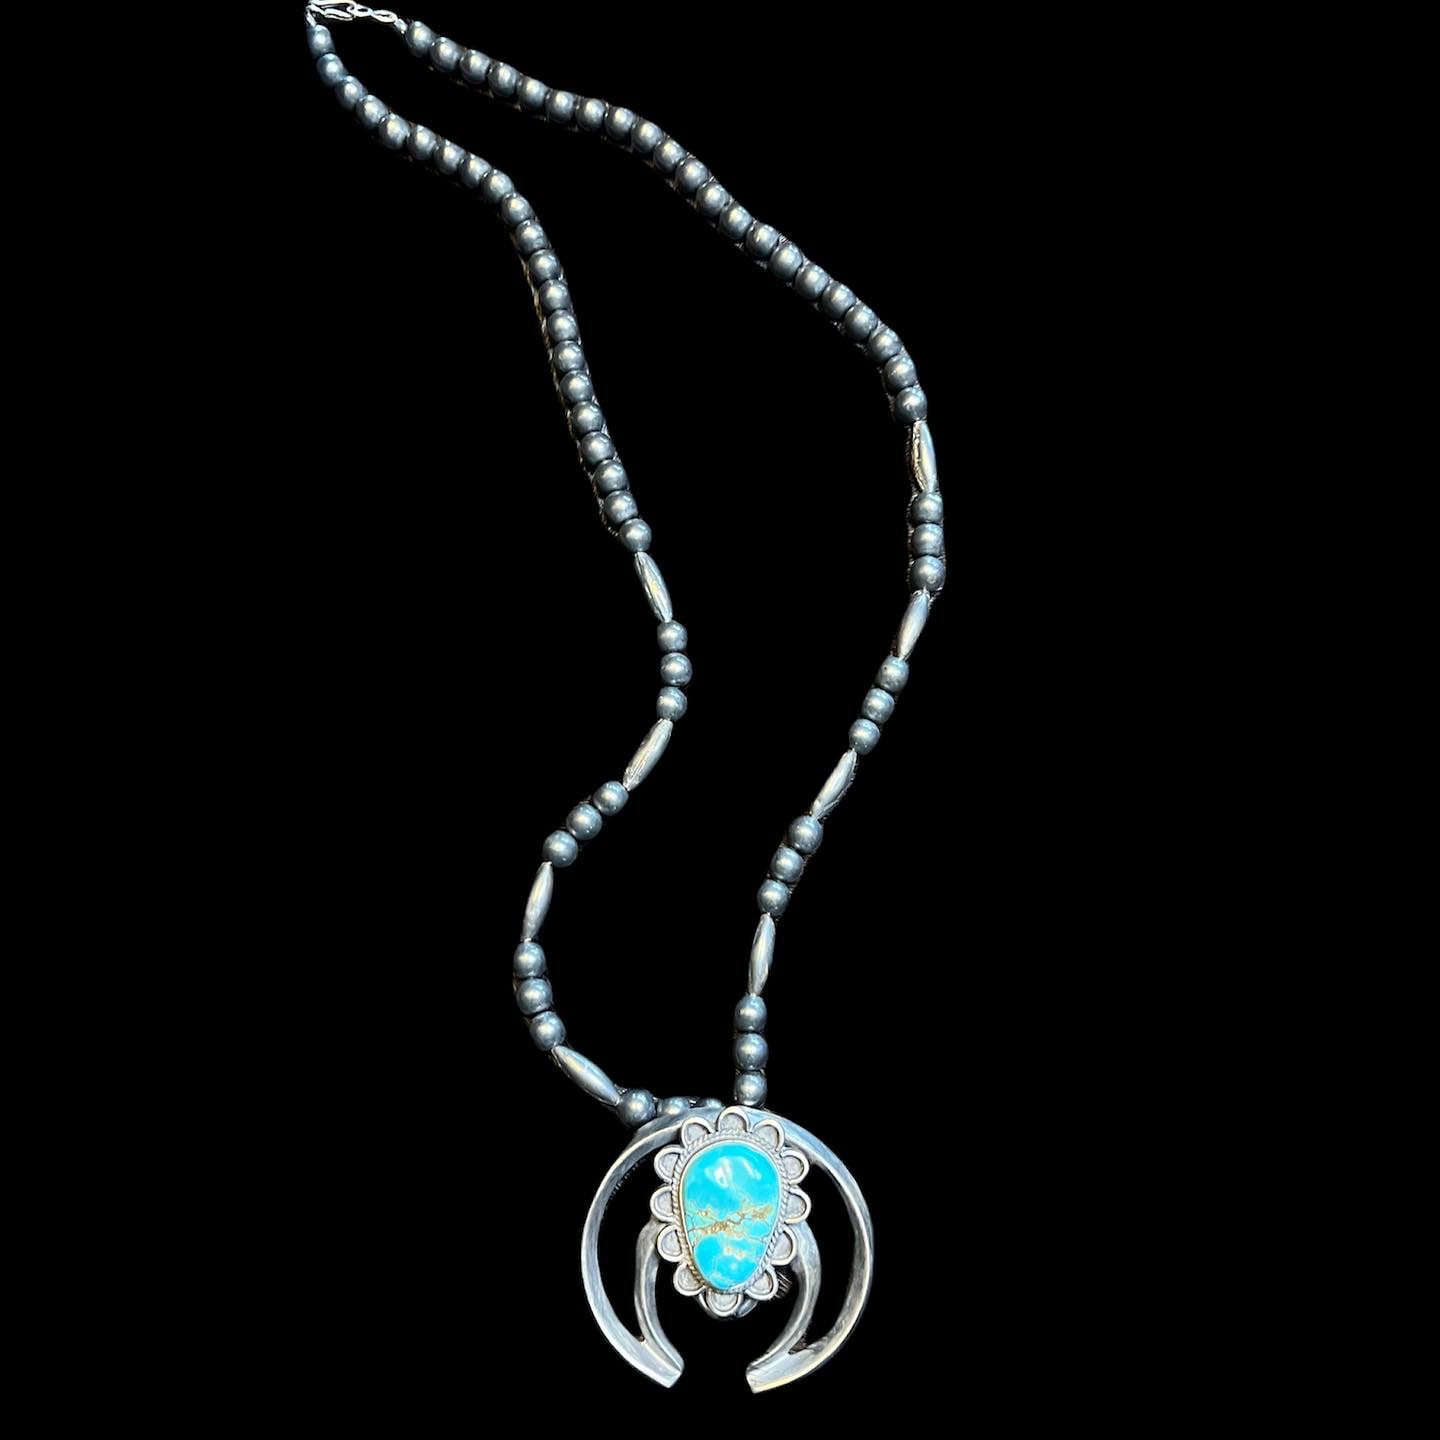 Vintage Silver Bead Necklace with Turquoise Naja